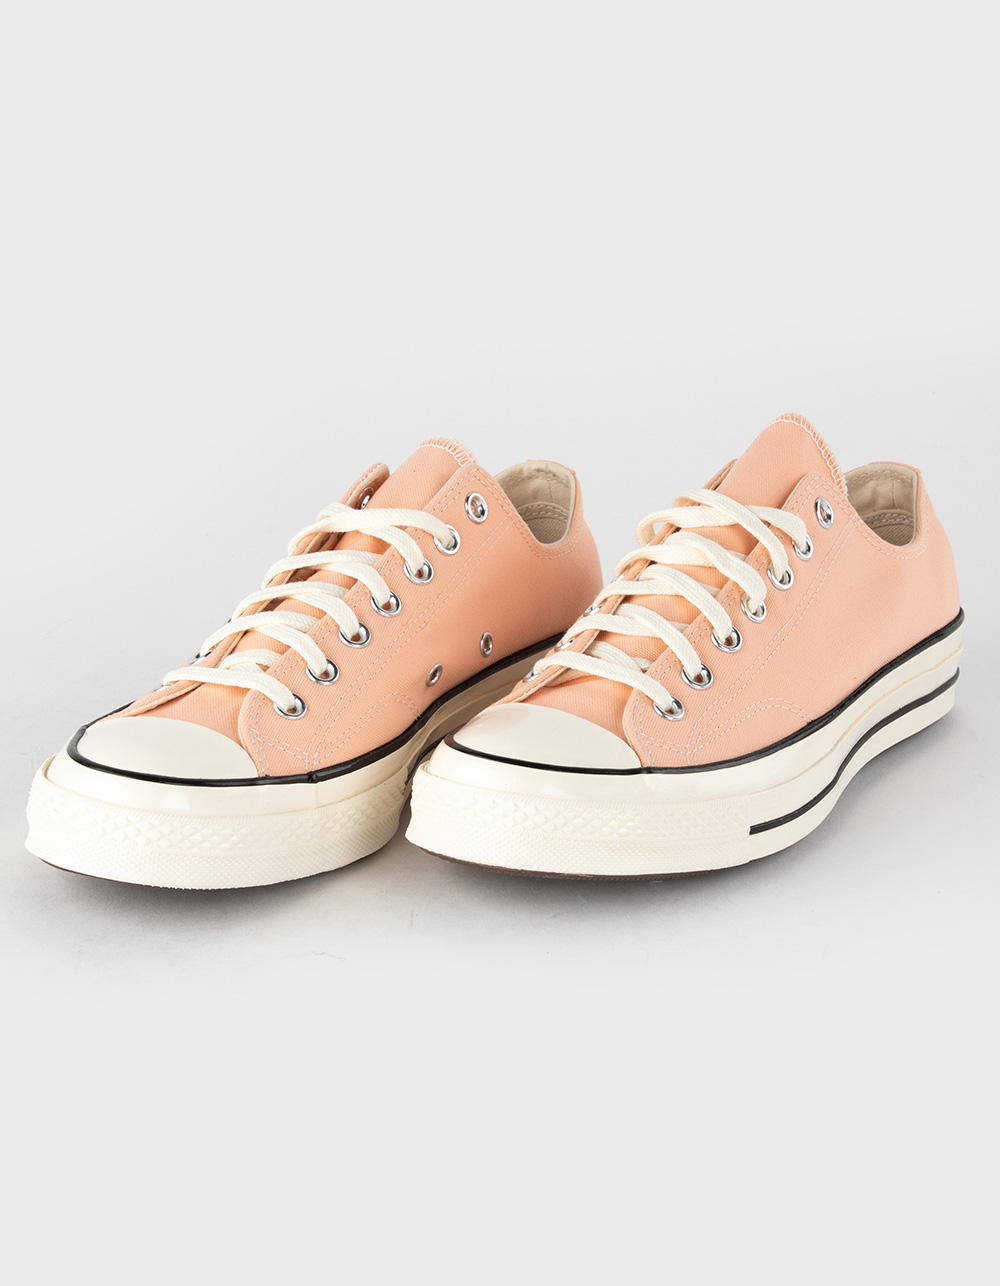 Ja Tilgivende investering CONVERSE Chuck Taylor All Star 70 Ox Mens Shoes - CORAL | Tillys